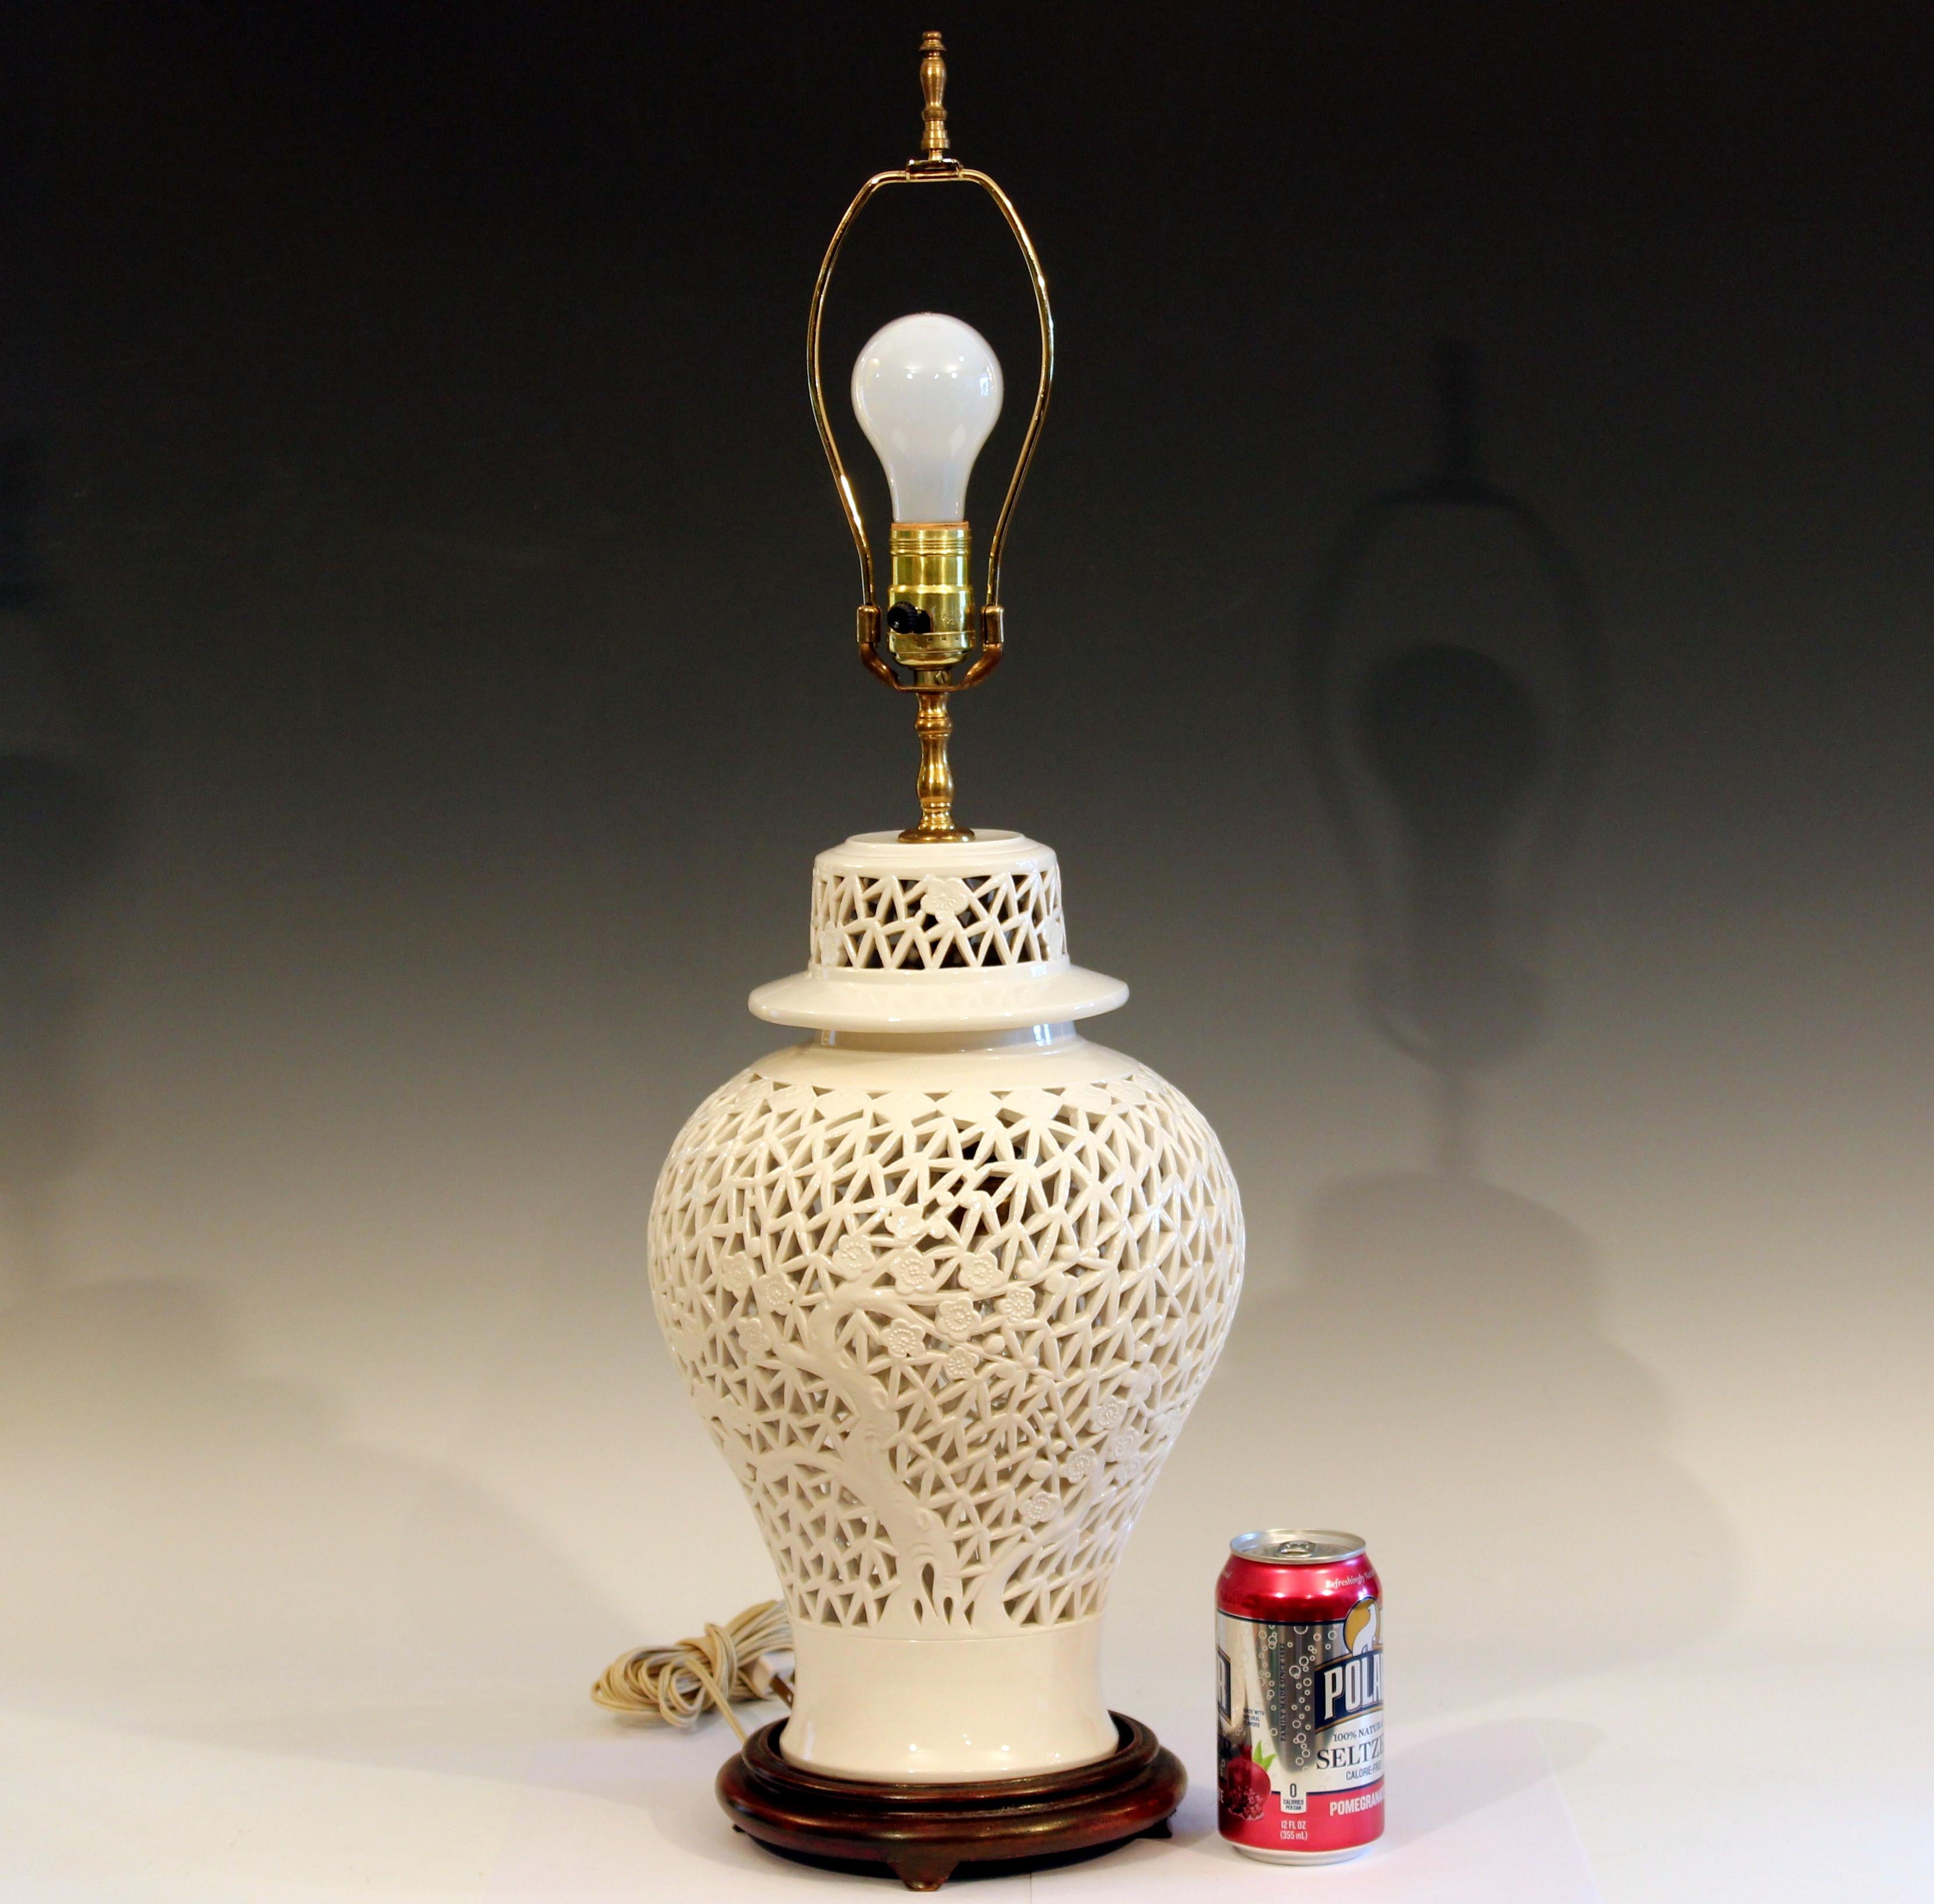 Turned Old Chinese Porcelain Vase Lamp Reticulated White Carved Blanc de Chine Jar